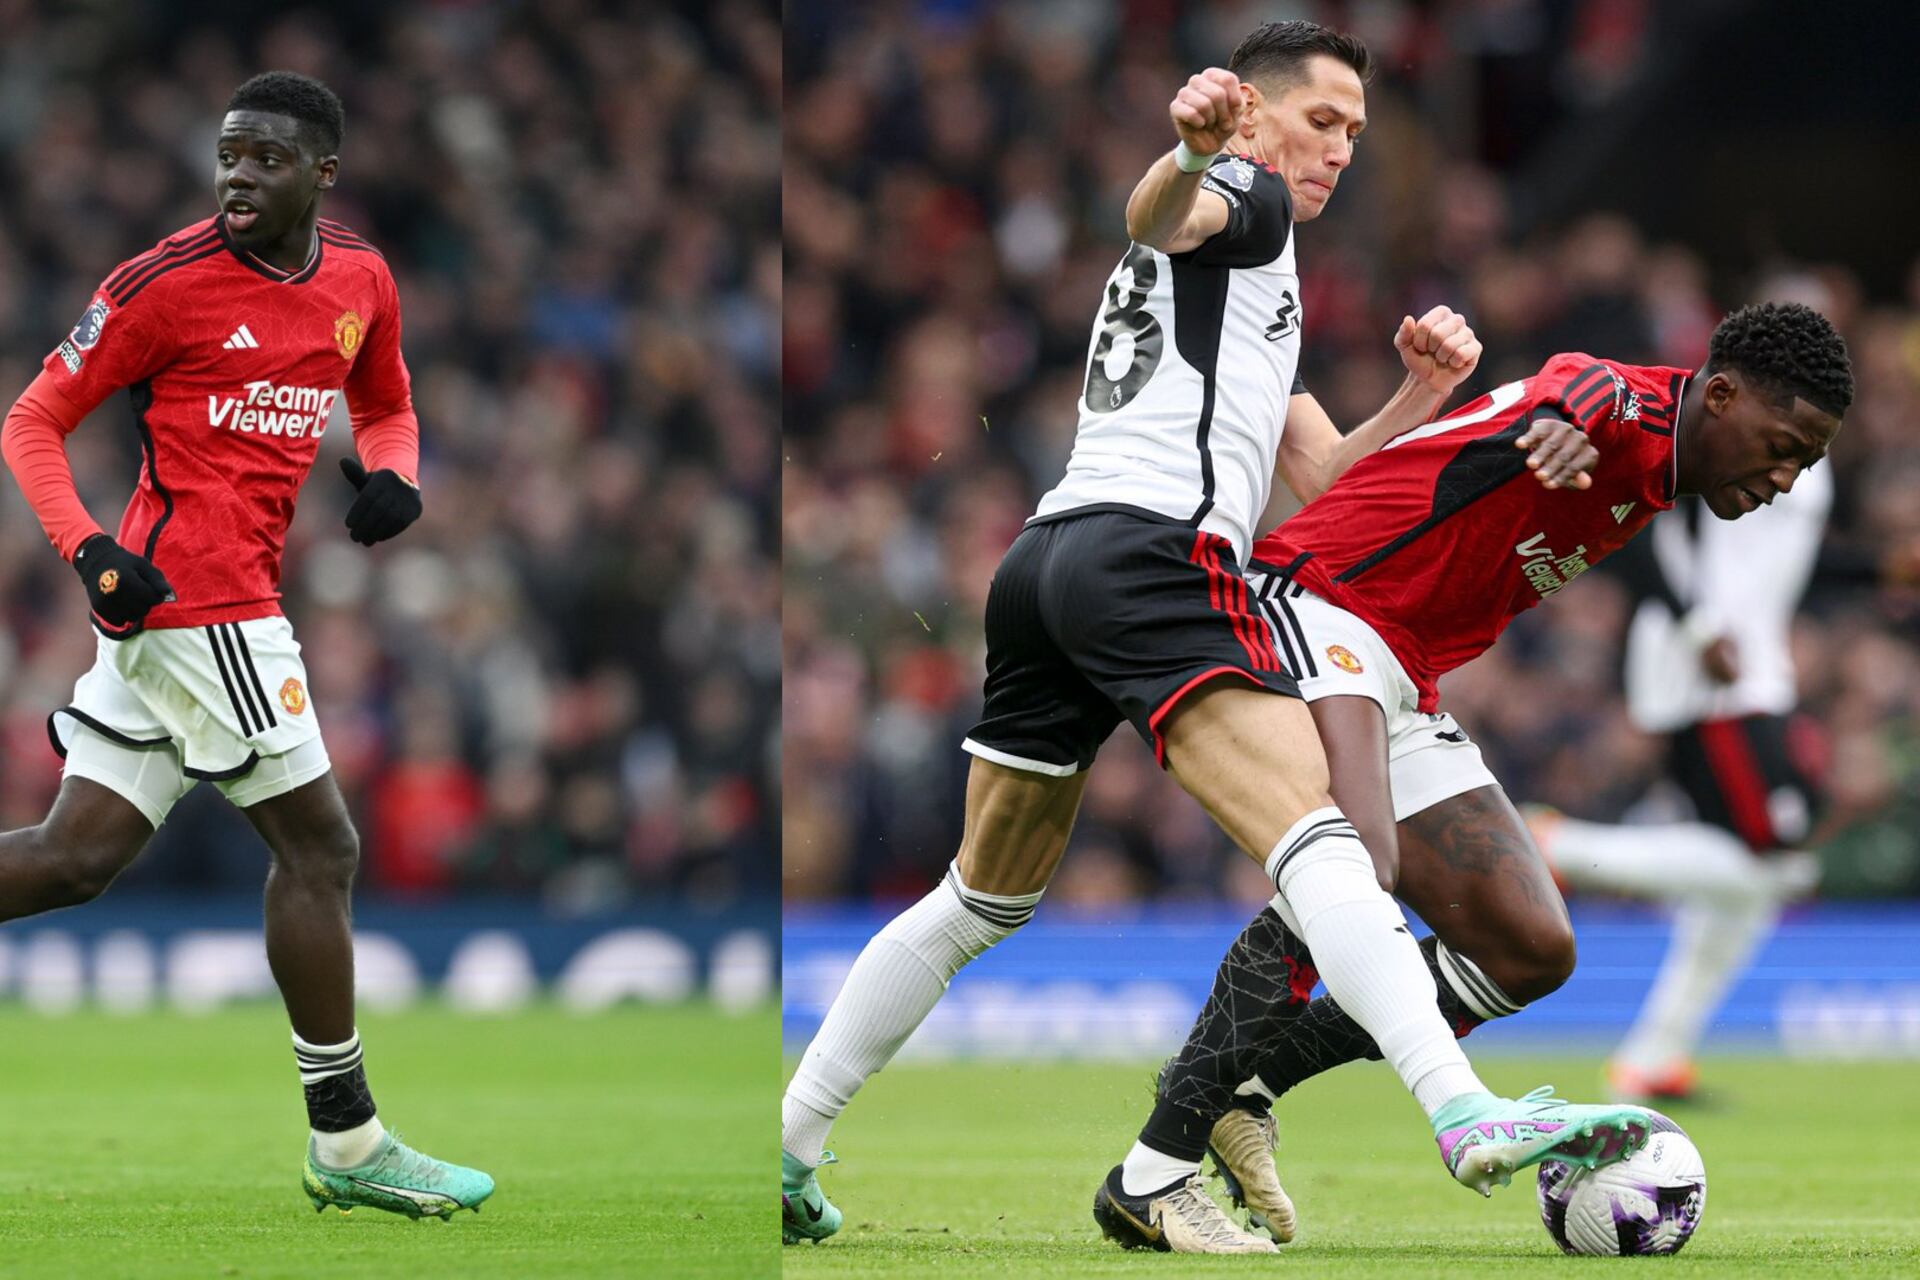 No goals as it stays 0-0 at Old Trafford between Man United and Fulham